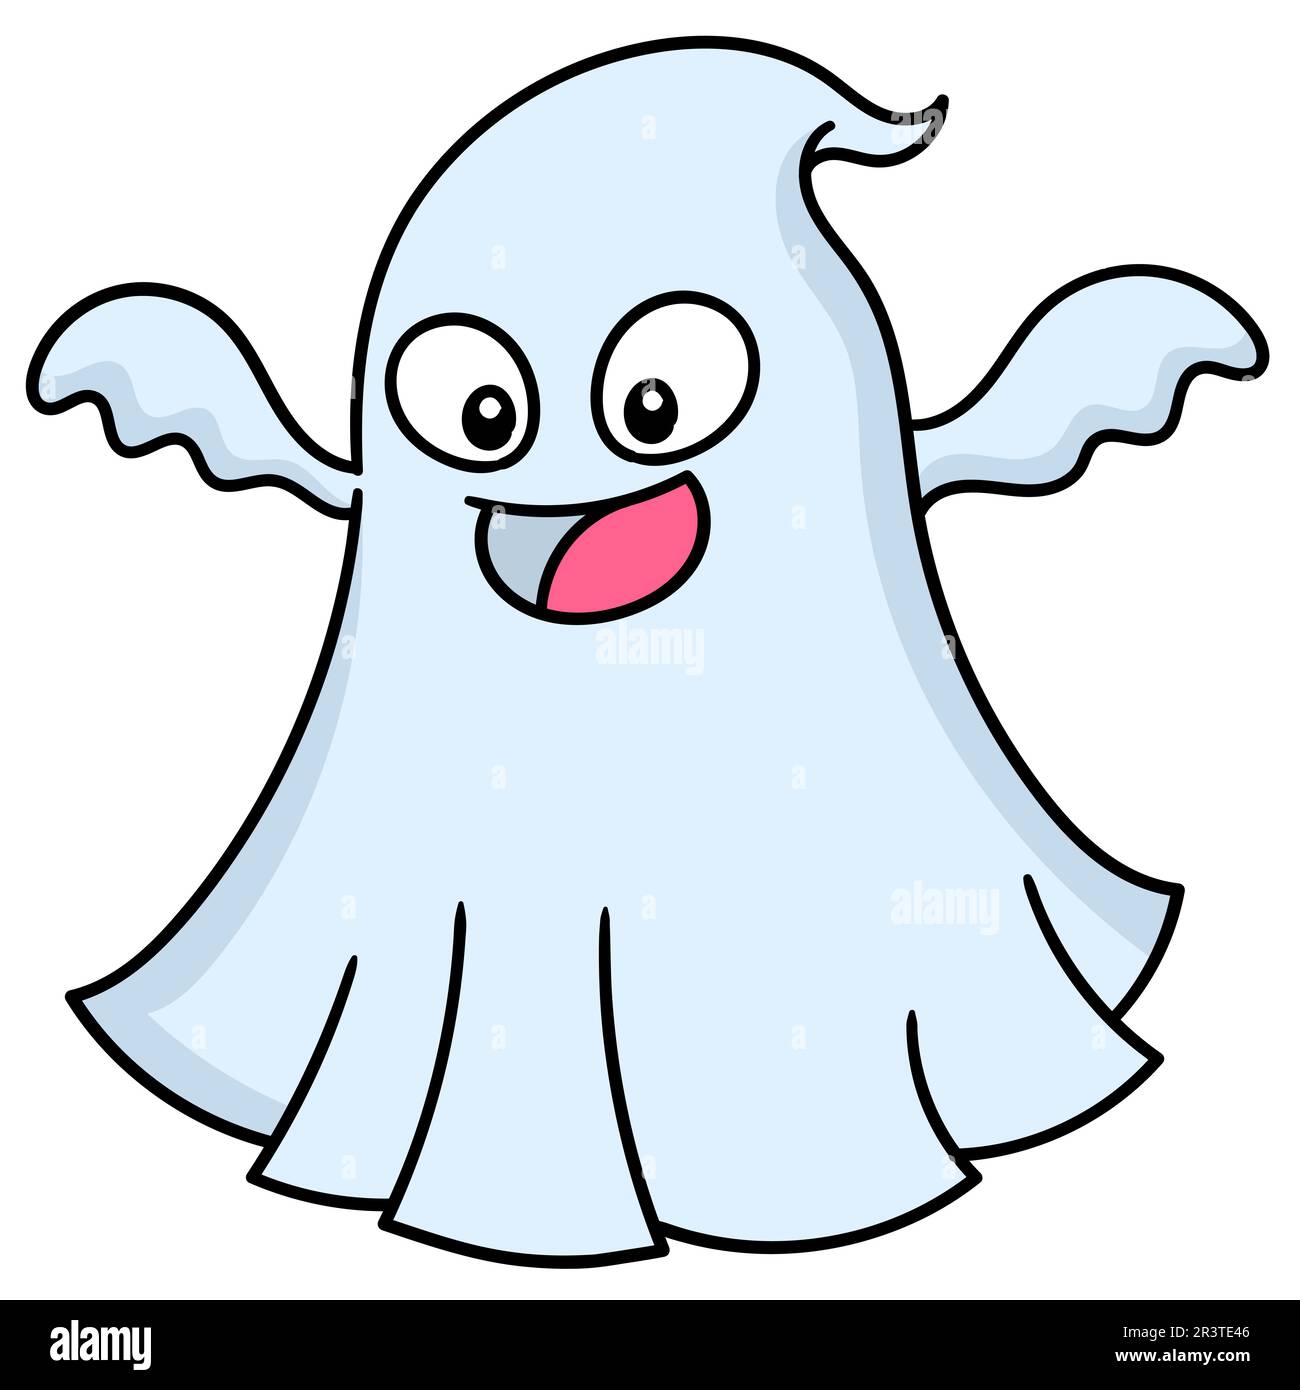 A ghost with a cute face laughed trying to frighten him, doodle icon image kawaii Stock Photo